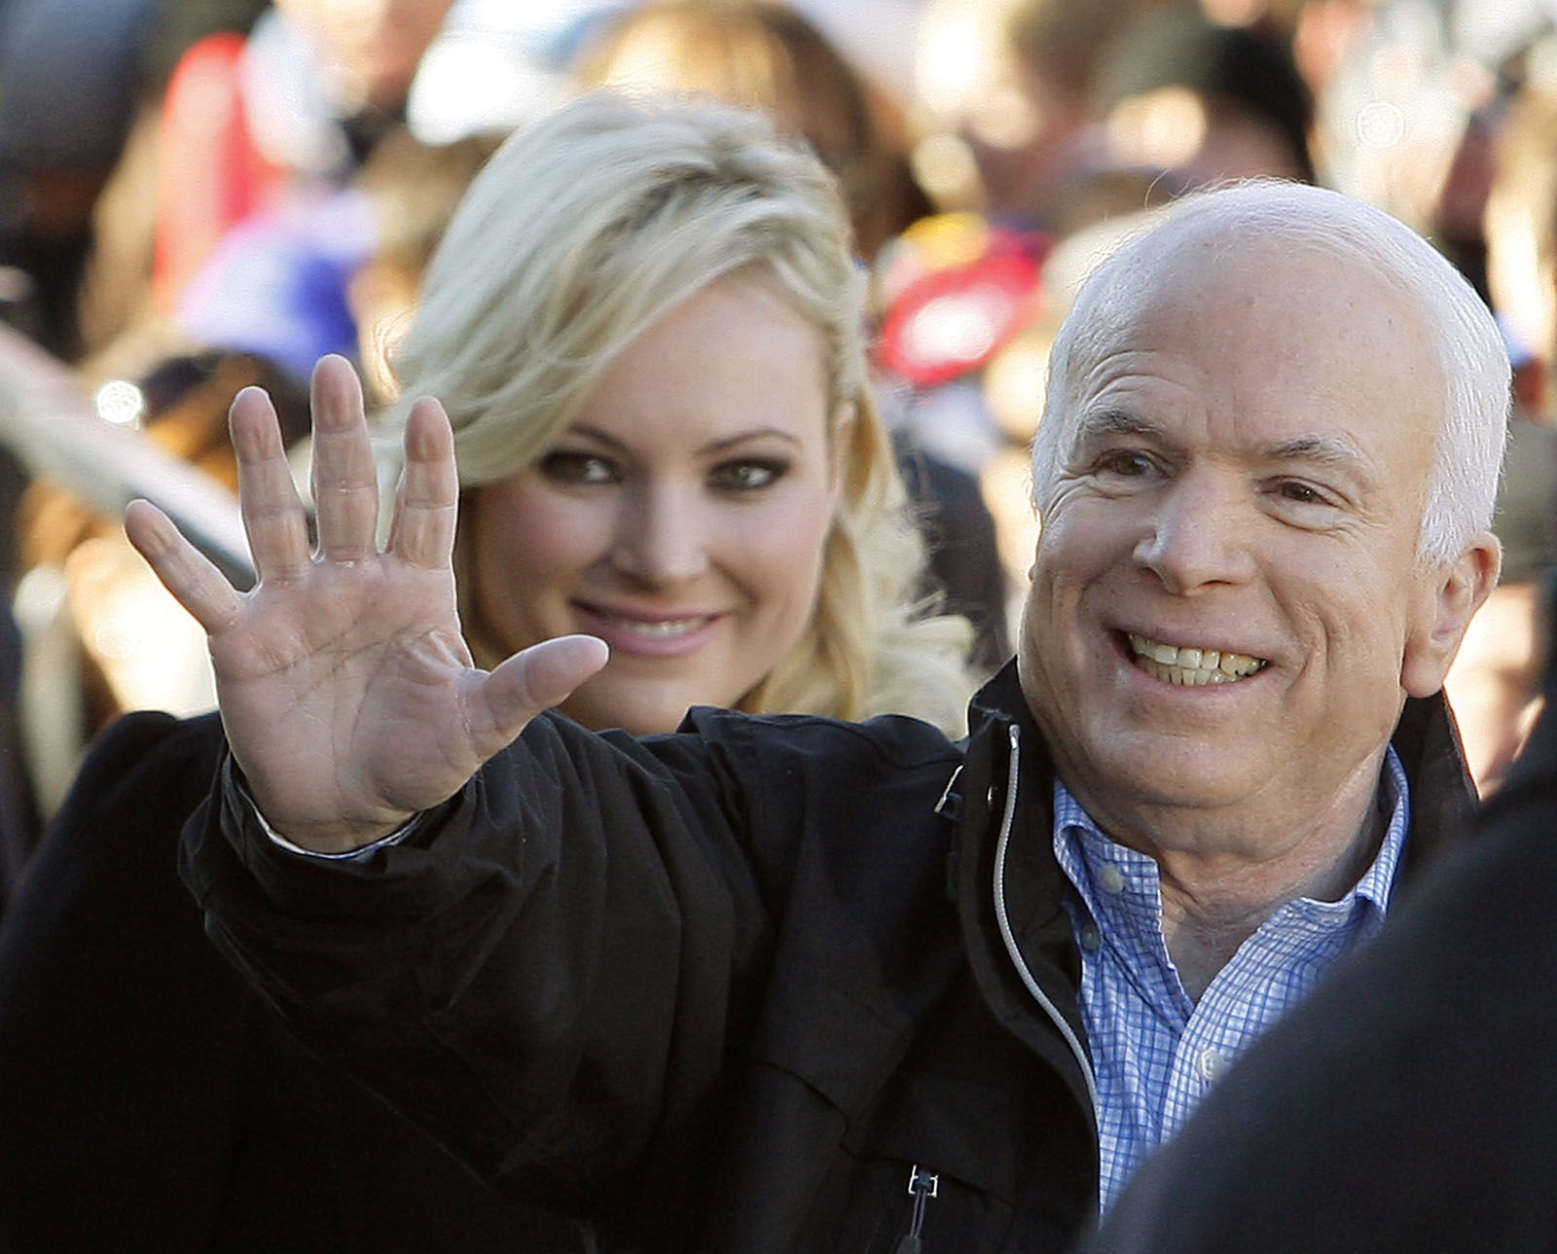 After his loss in the 2000 Republican primary, Sen. McCain ran again in 2008 and this time won the Republican nomination. In this photo McCain accompanied by his daughter Meghan McCain, waves to supporters as he enters a campaign rally at Defiance Junior High School in Defiance, Ohio., Thursday, Oct. 30, 2008. (AP Photo/Stephan Savoia)